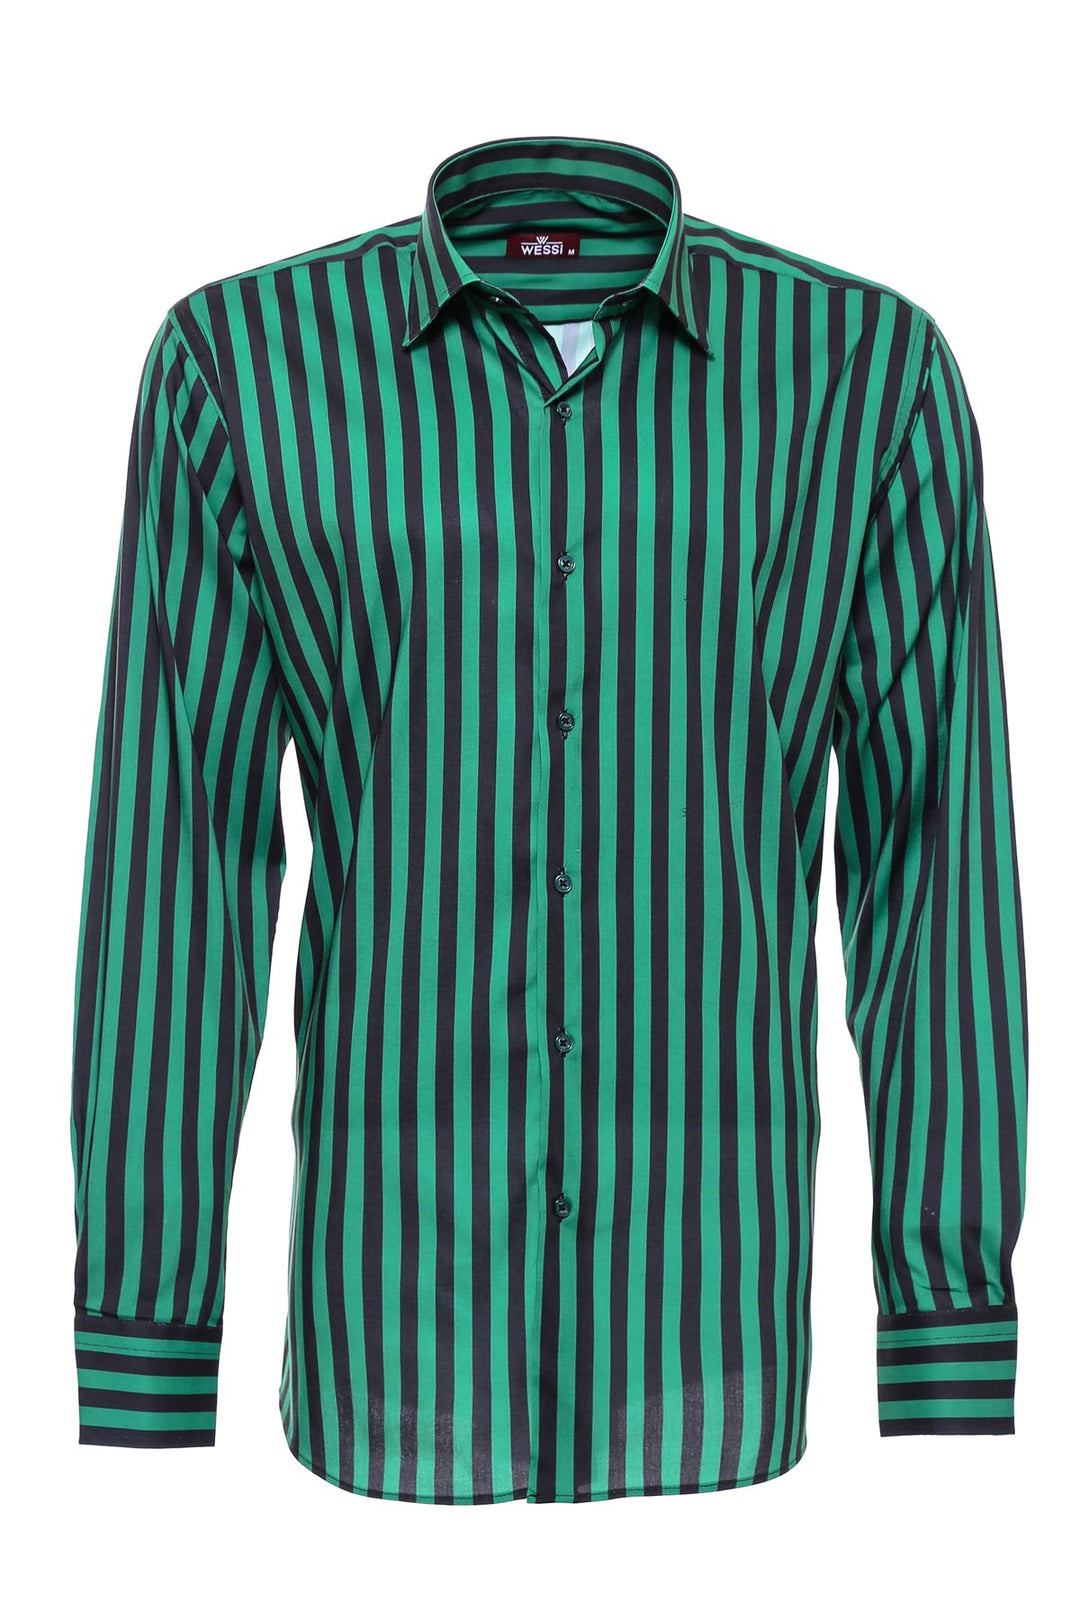 Black Striped Shirt Over Green - Wessi